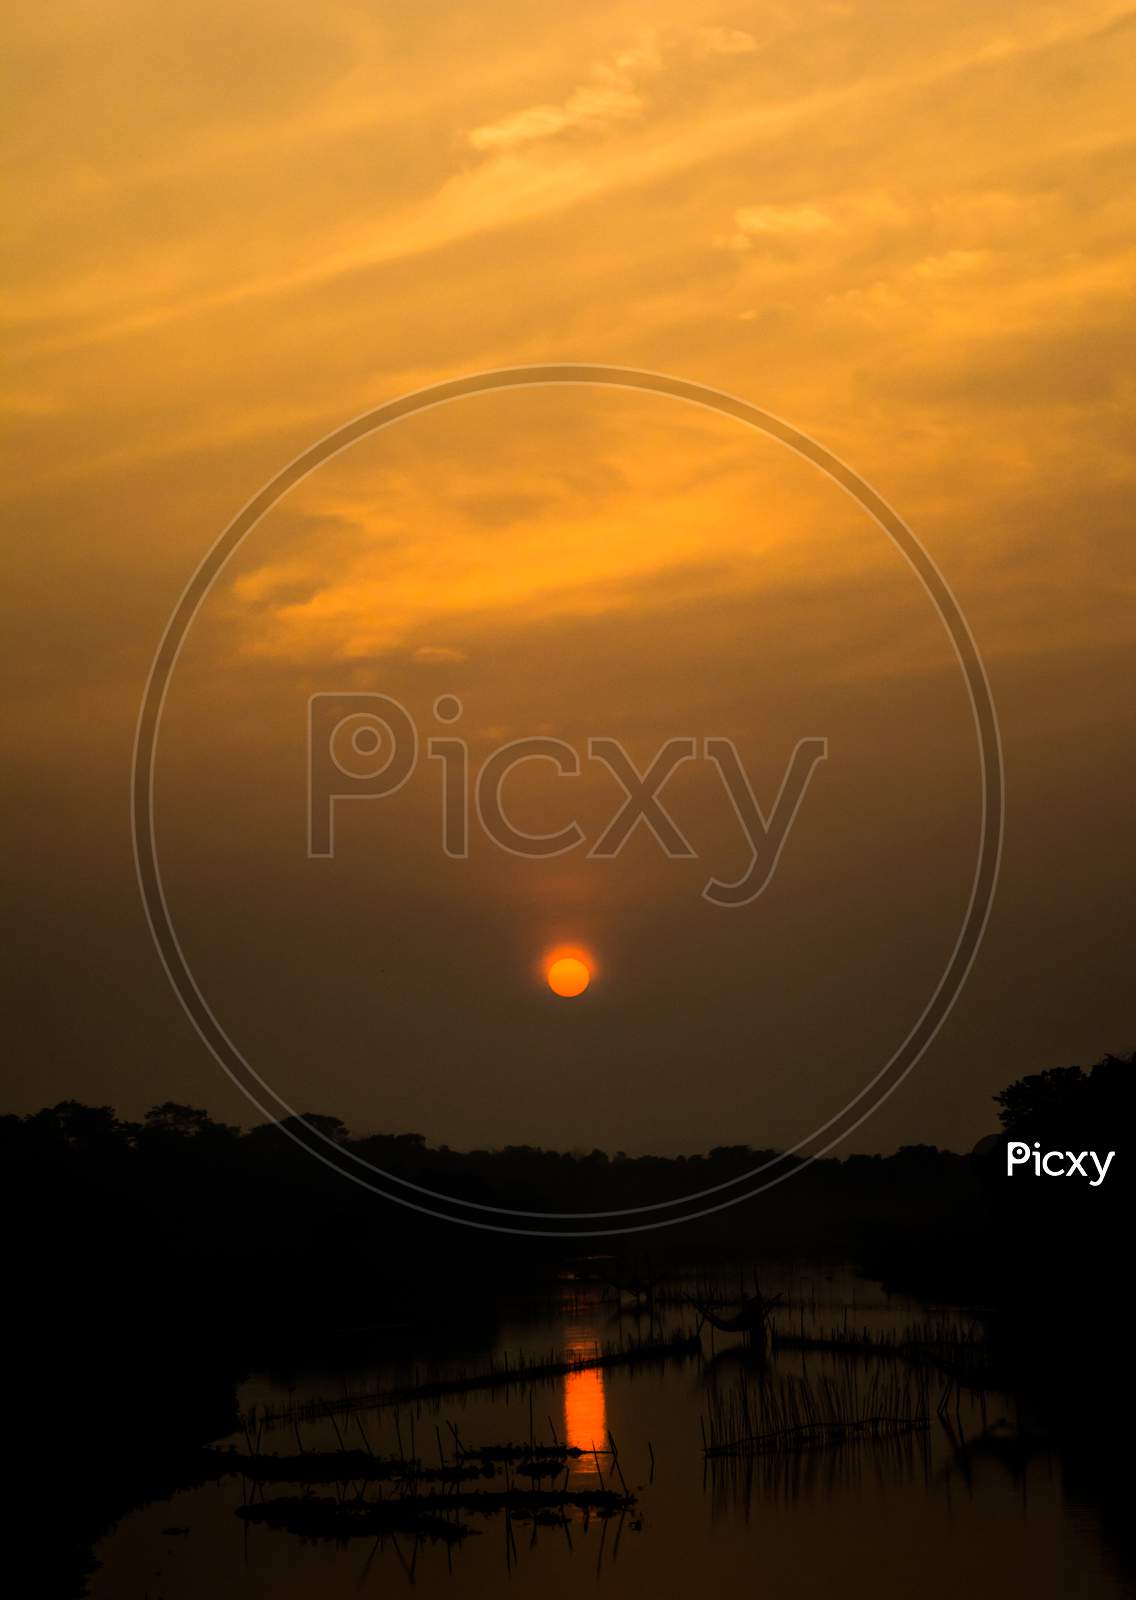 Sunset View with lake and river in the evening at Kaziranga Assam, India.